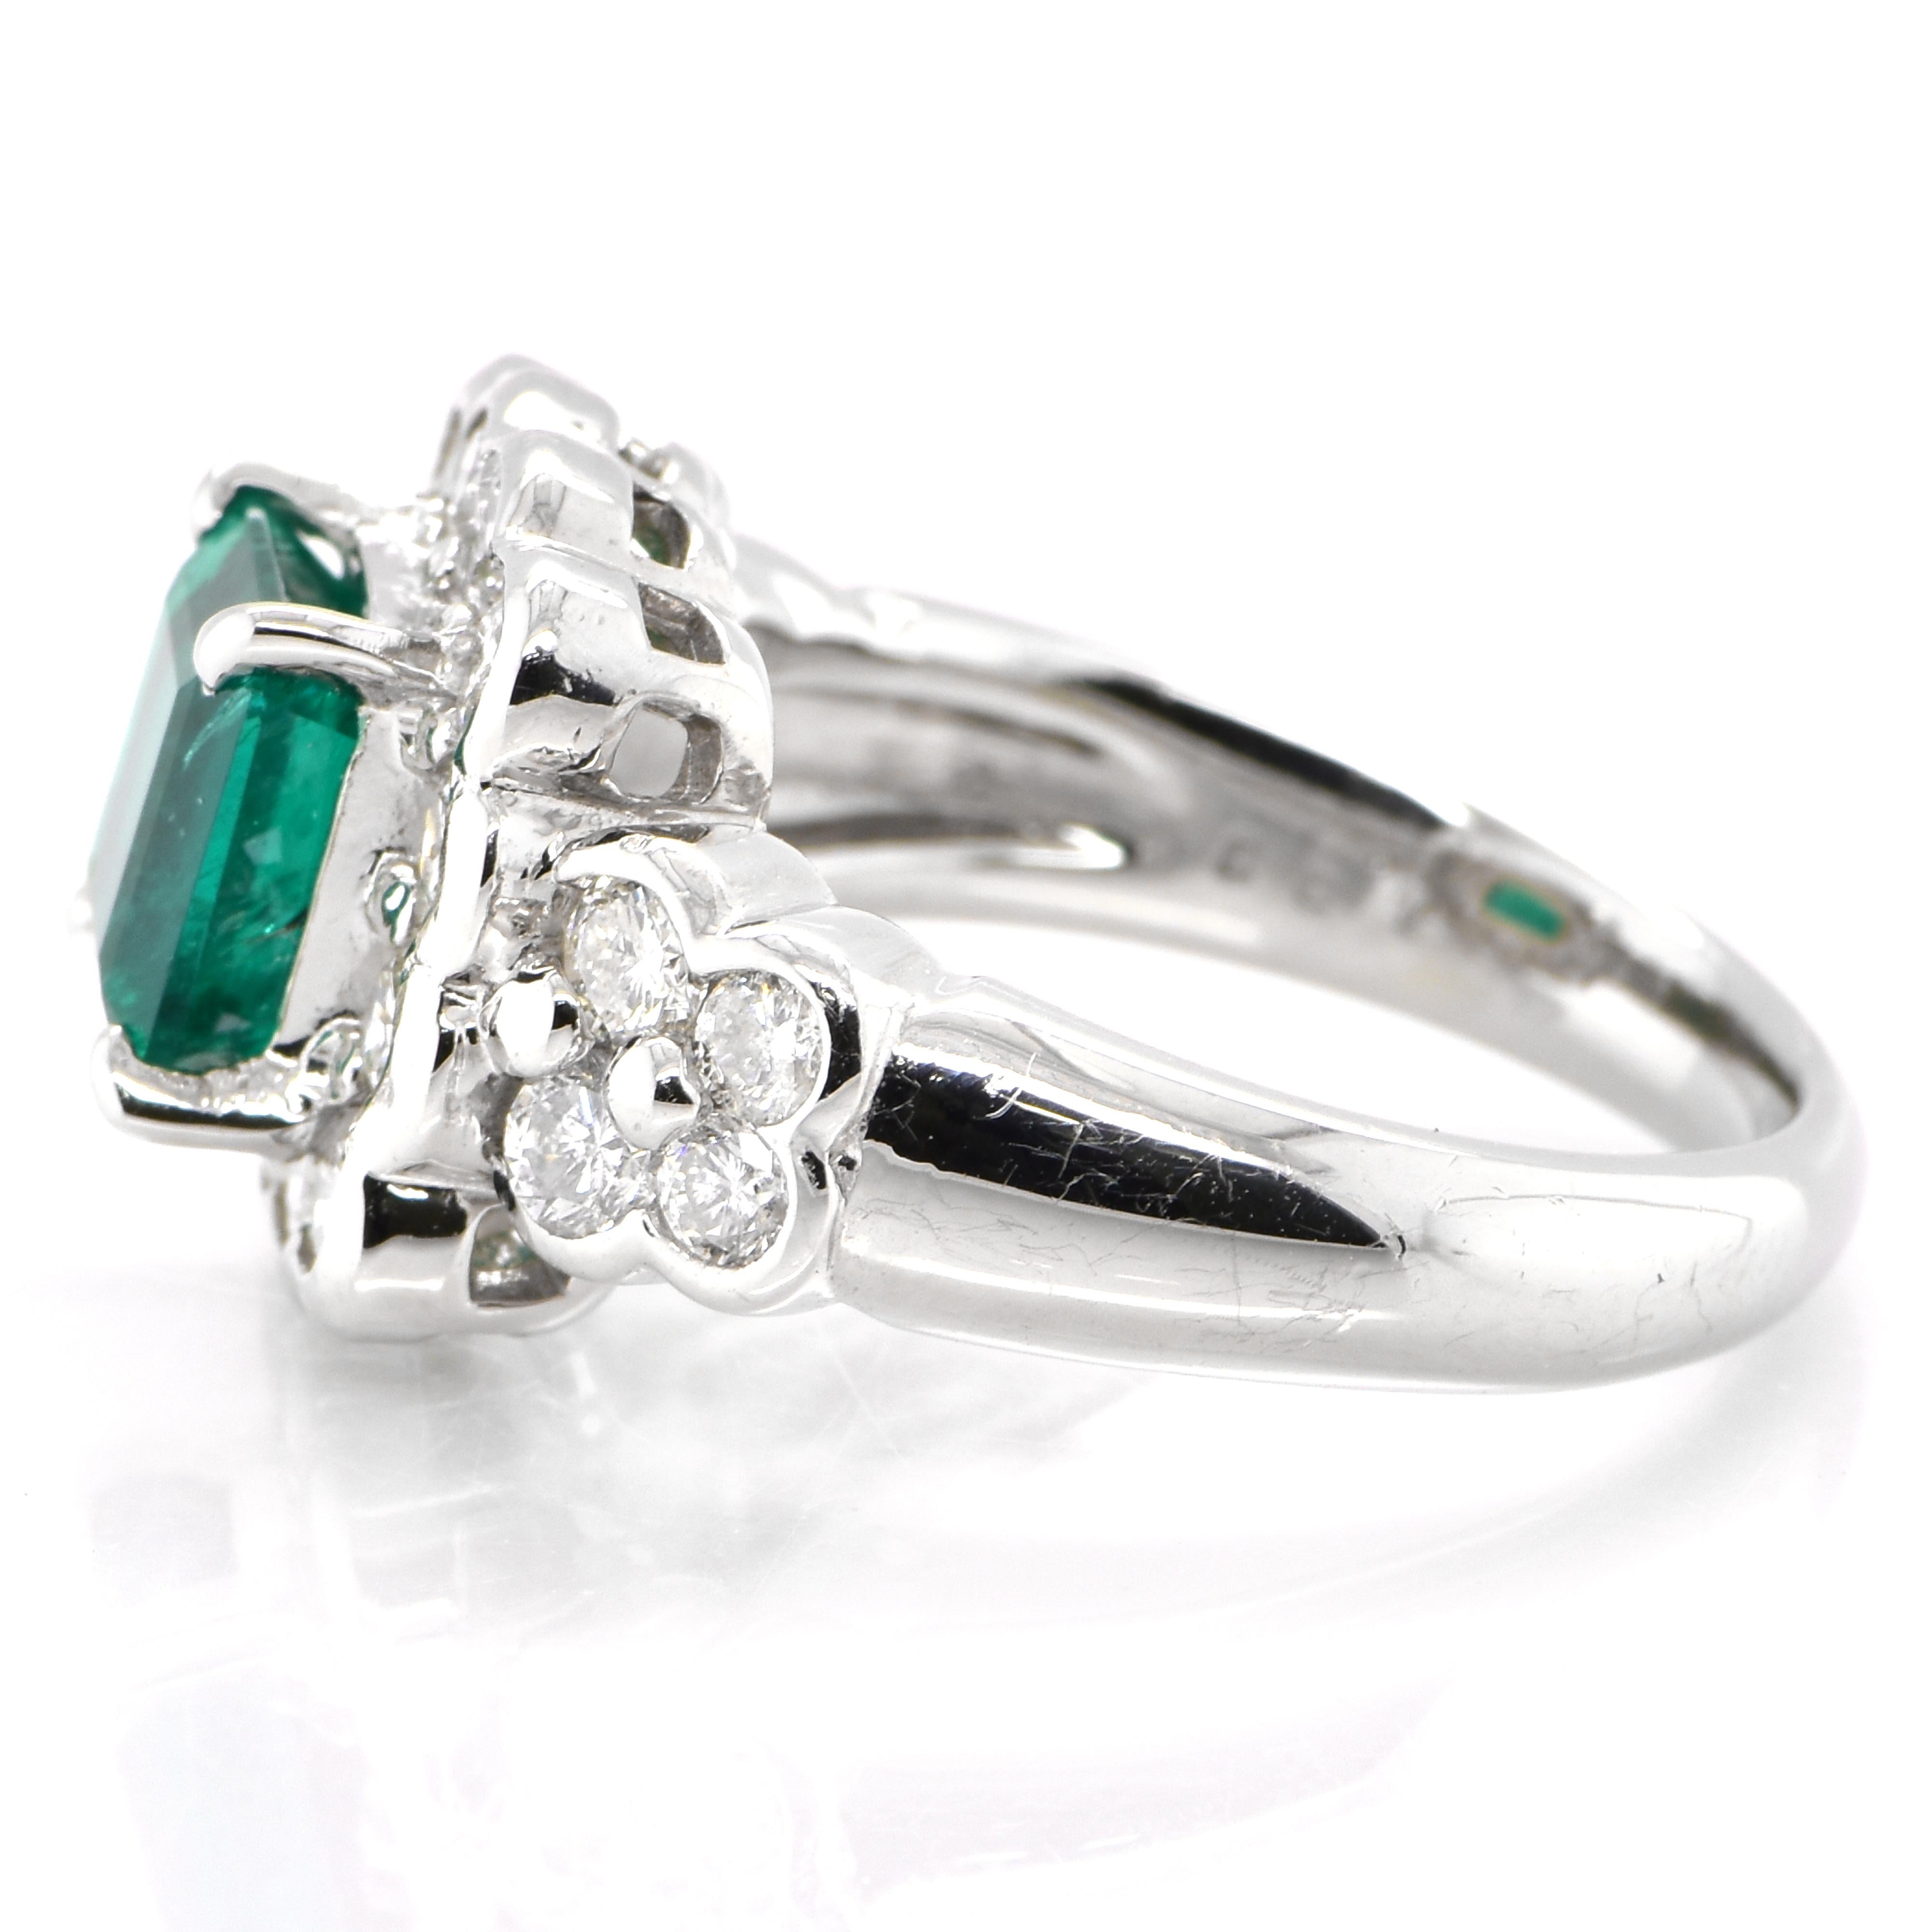 Emerald Cut GIA Certified 1.87 Carat, Colombian, Muzo Green Emerald Ring set in Platinum For Sale